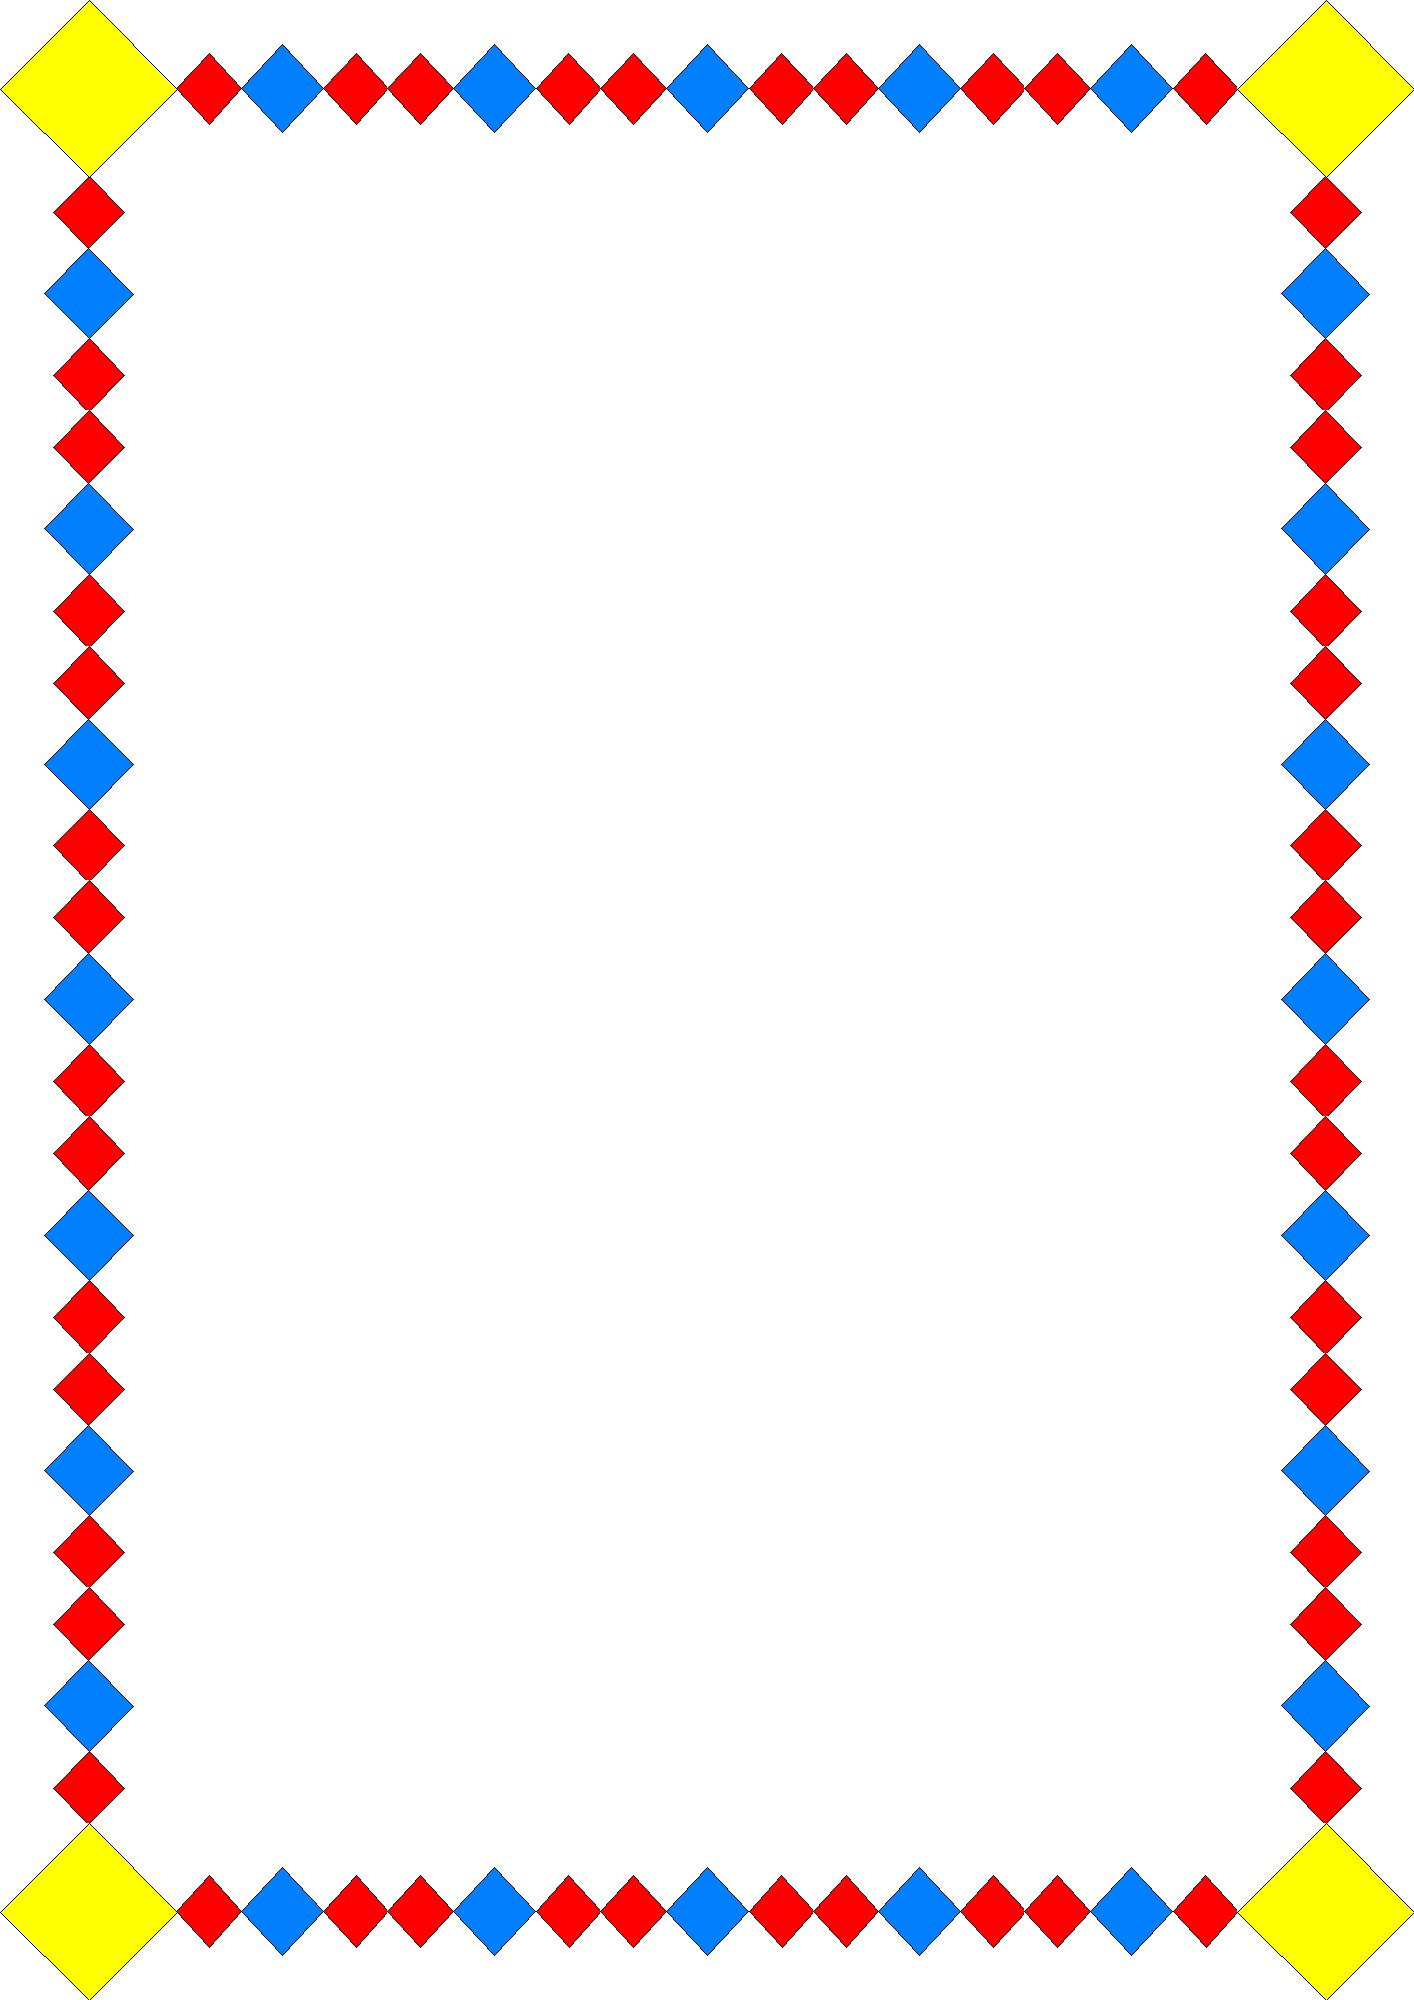 Picture Frame Clipart Border.